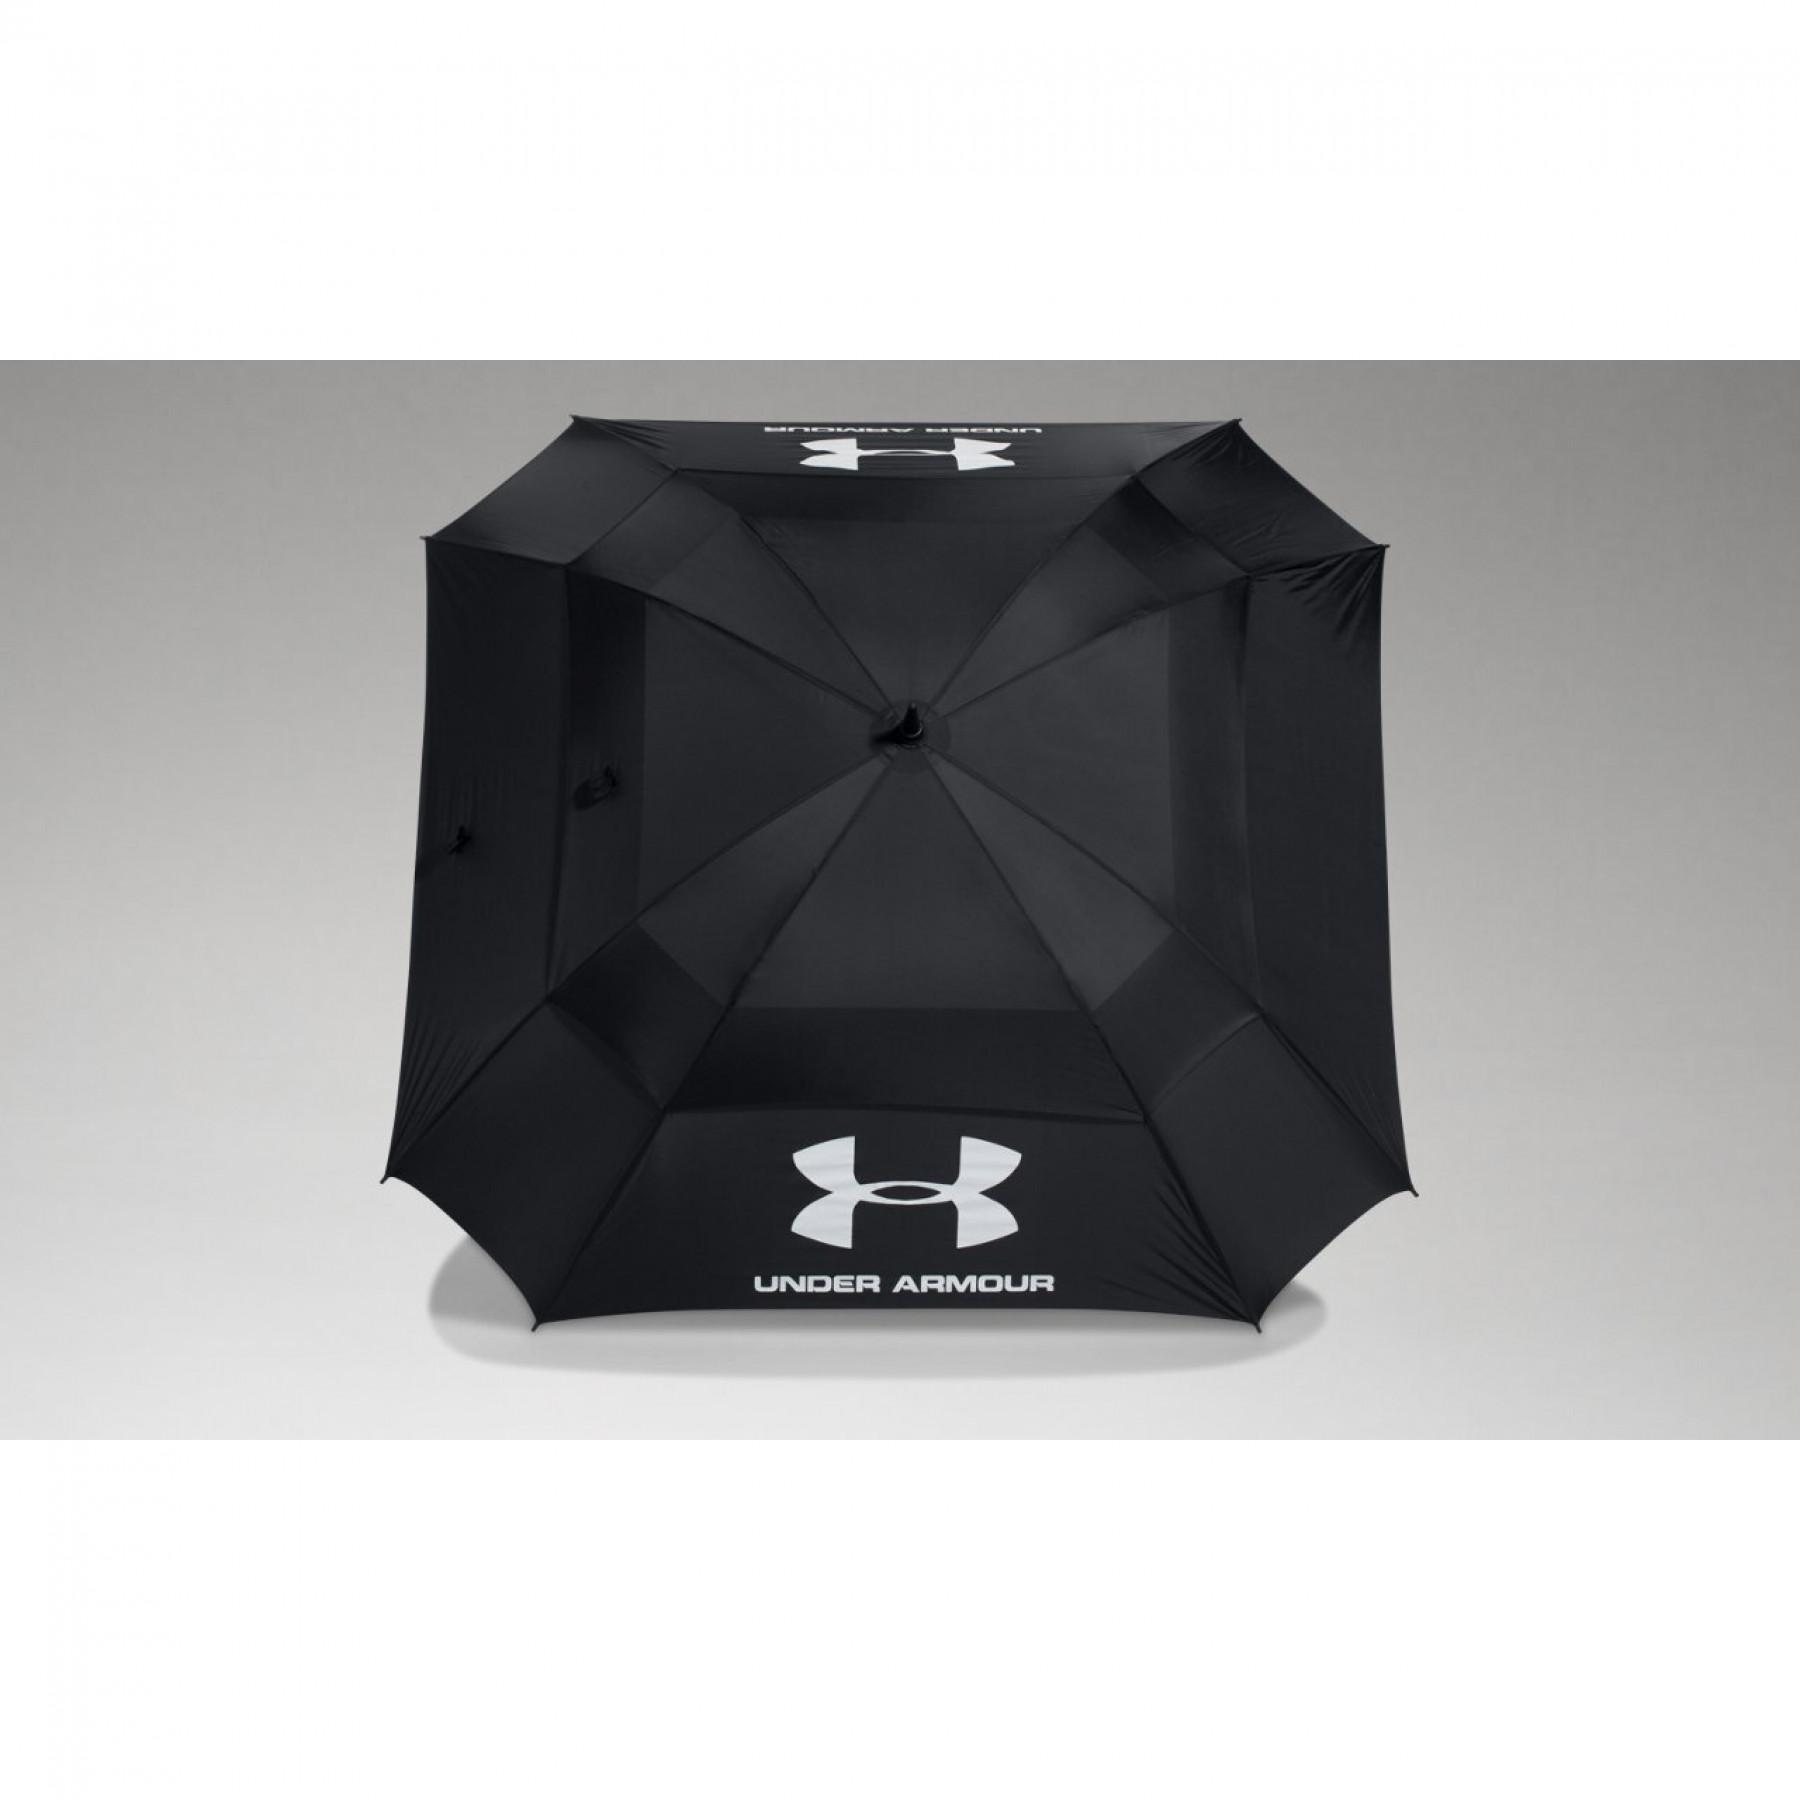 Paraply Under Armour Golf – Double toile